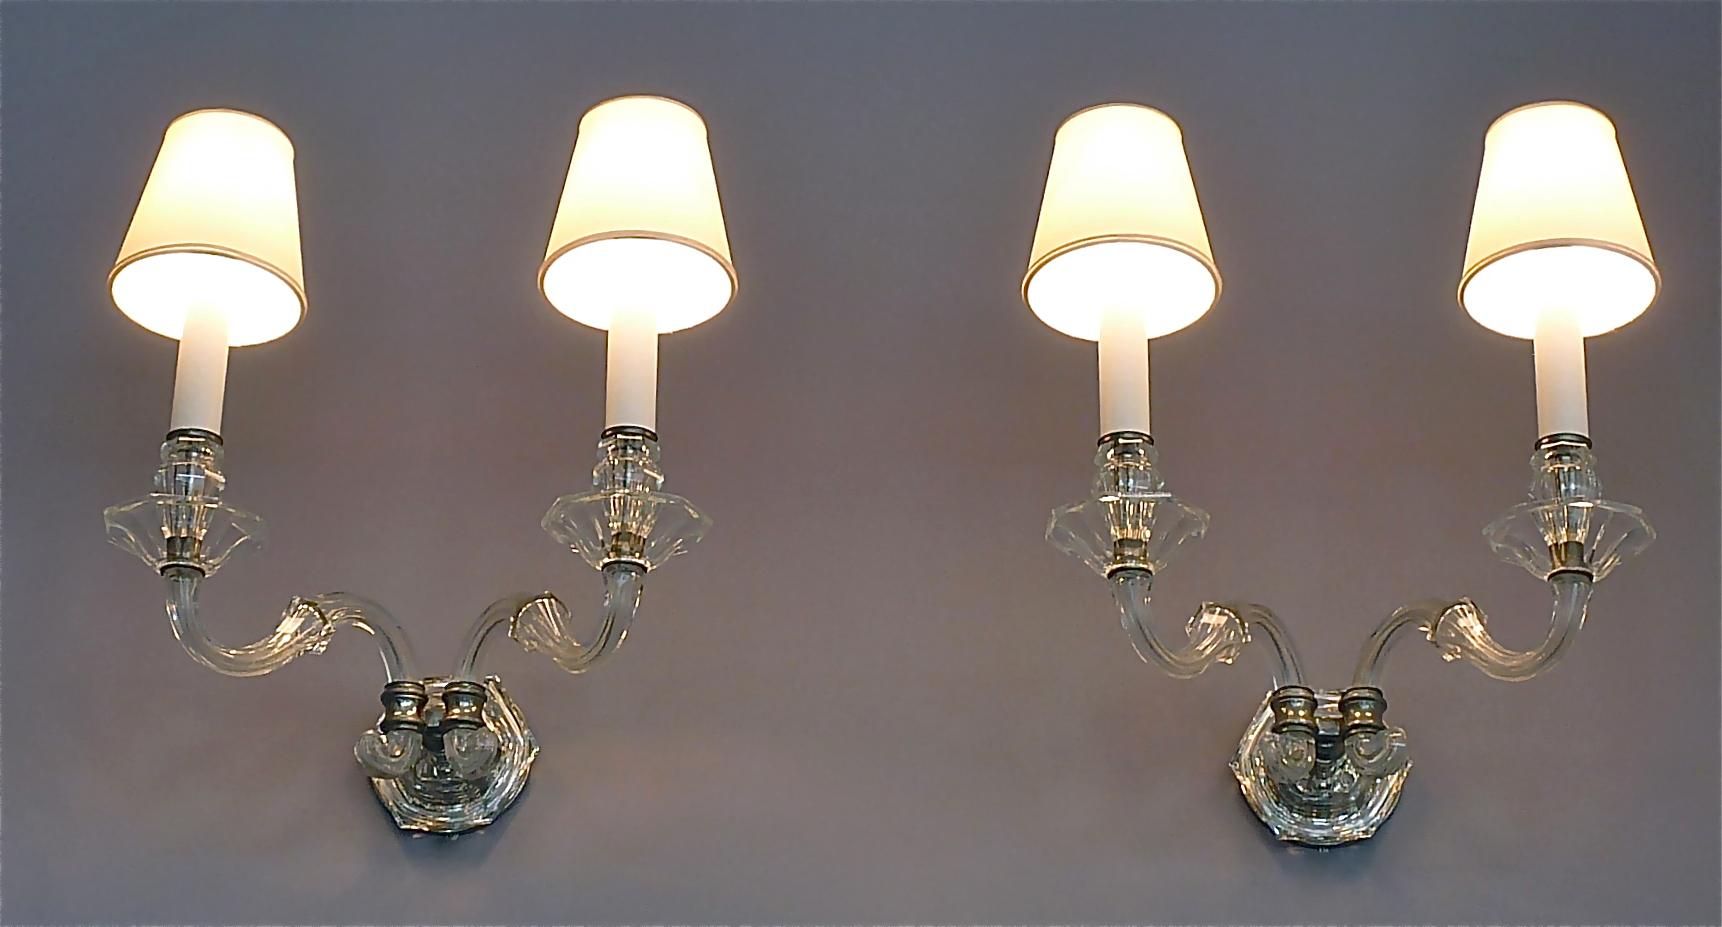 Pair of Art Deco Faceted Crystal Glass Wall Lights Sconces 1920, Baccarat Style 7